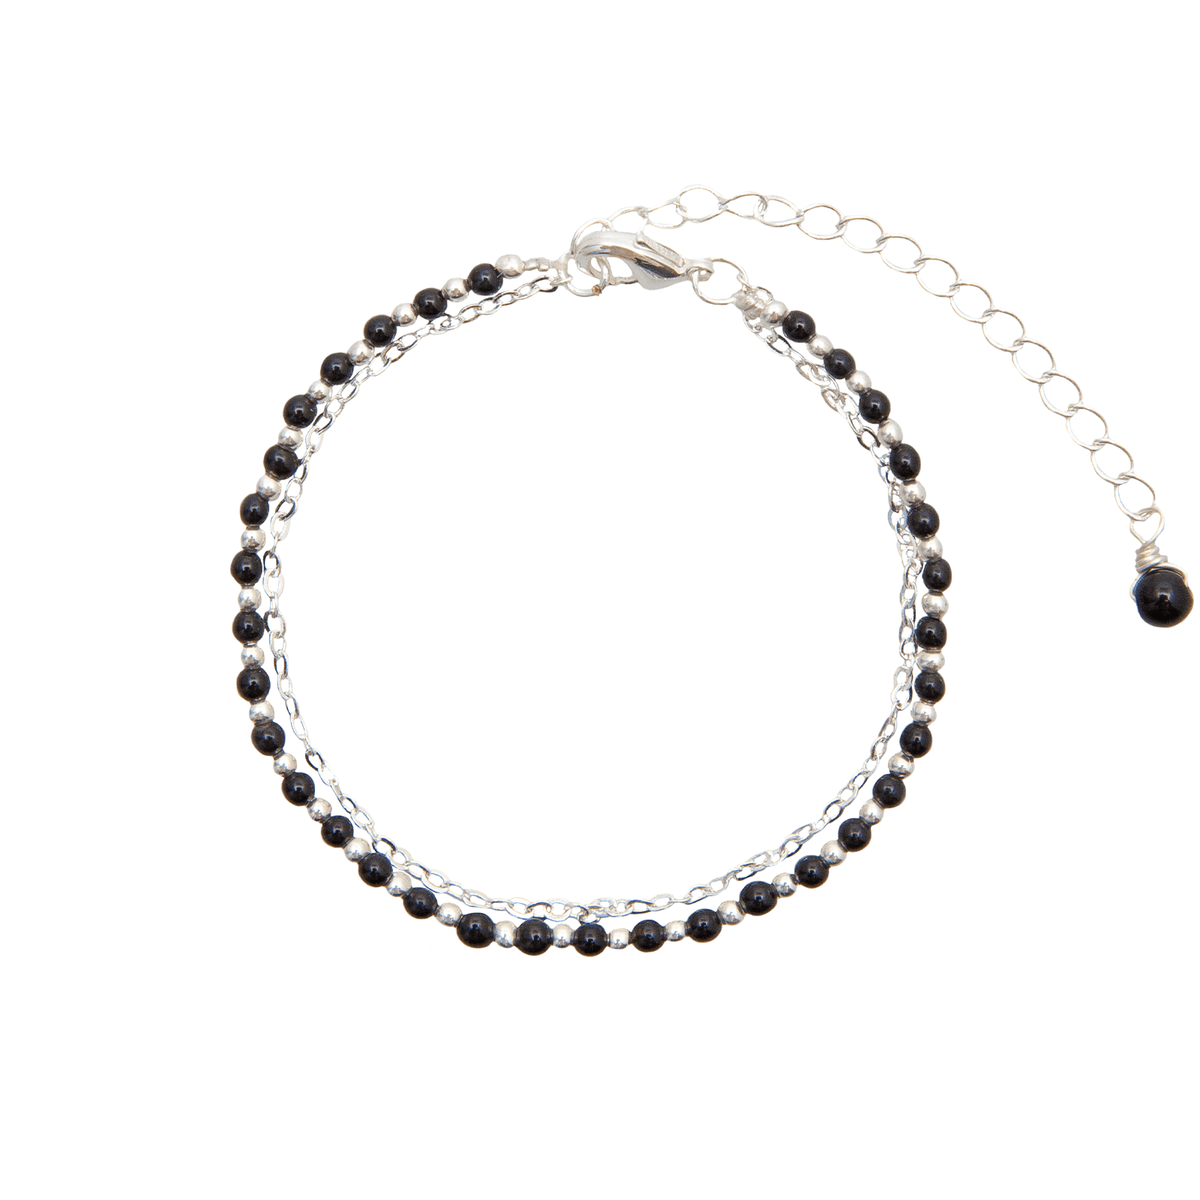 2mm onyx stone and silver bead healing bracelet with an attached silver chain bracelet